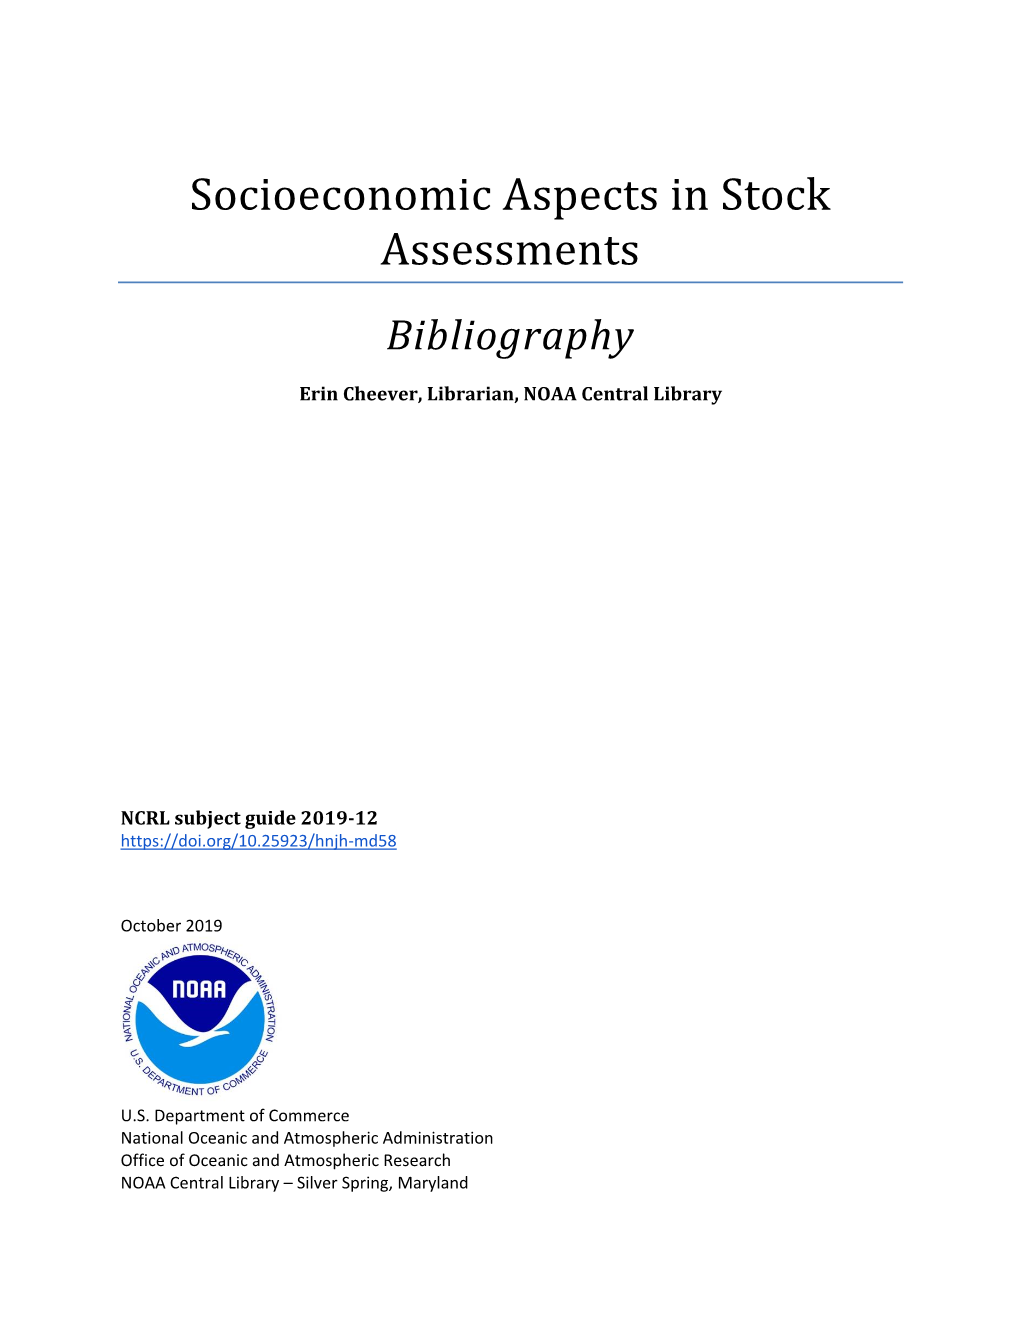 Socioeconomic Aspects in Stock Assessments Bibliography